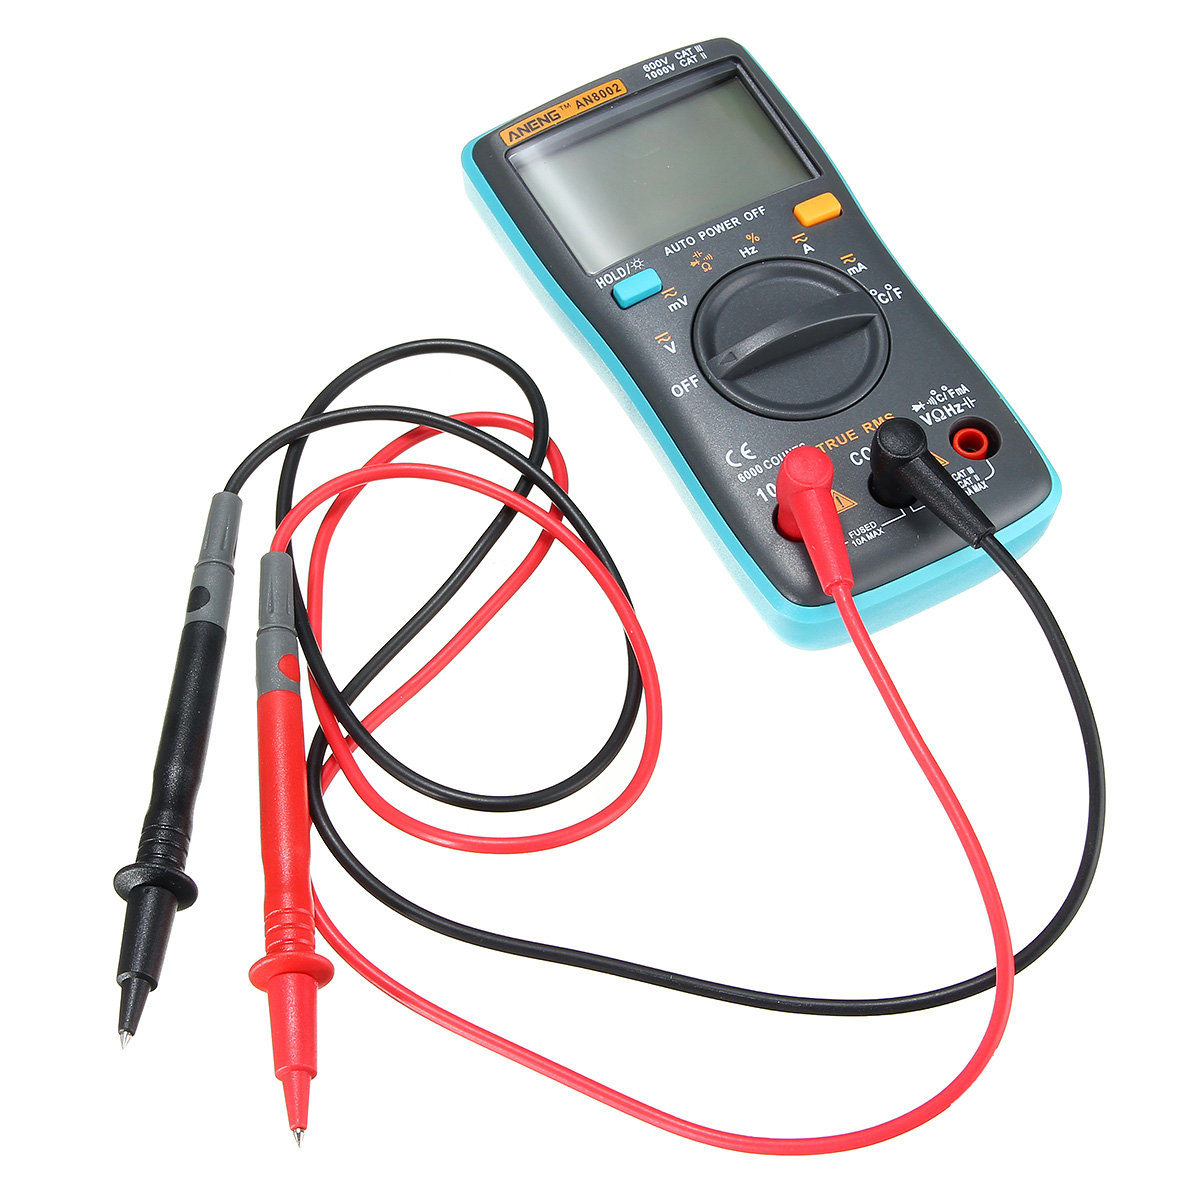 ANENG AN8002 Digital True RMS 6000 Counts Multimeter AC/DC Current Voltage Frequency Resistance Temperature Tester ℃/℉ 165